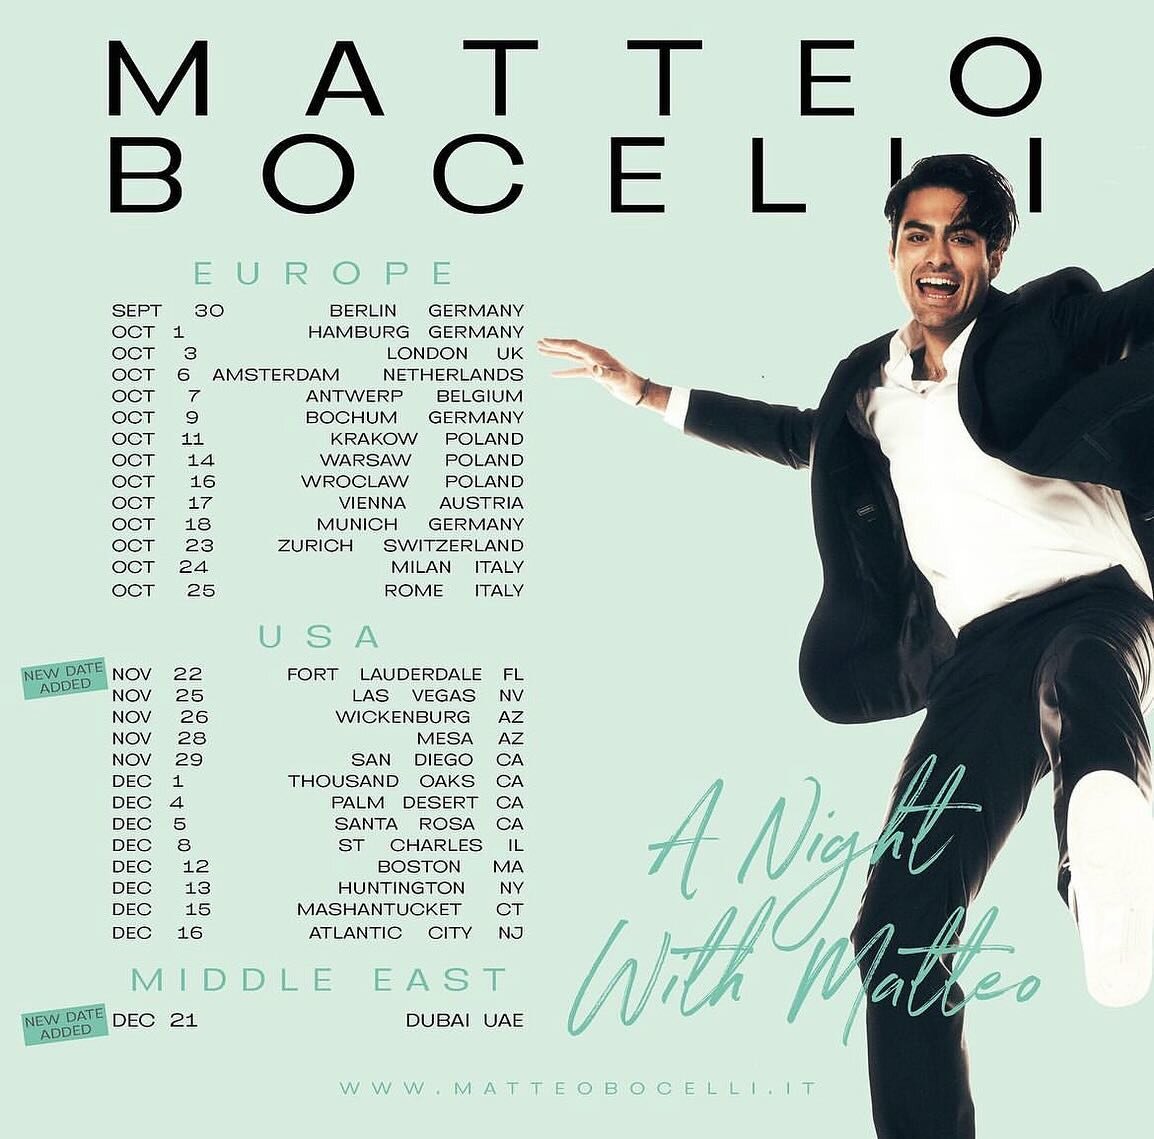 SO EXCITED to be joining @matteobocelli on the US portion of his world tour! We just played the first show in FL and now off to Vegas! See you at the shows! ✨🎻✈️ 

Huge thank you to @stephonstrings, @stringcandymusic, and Team Bocelli for trusting i